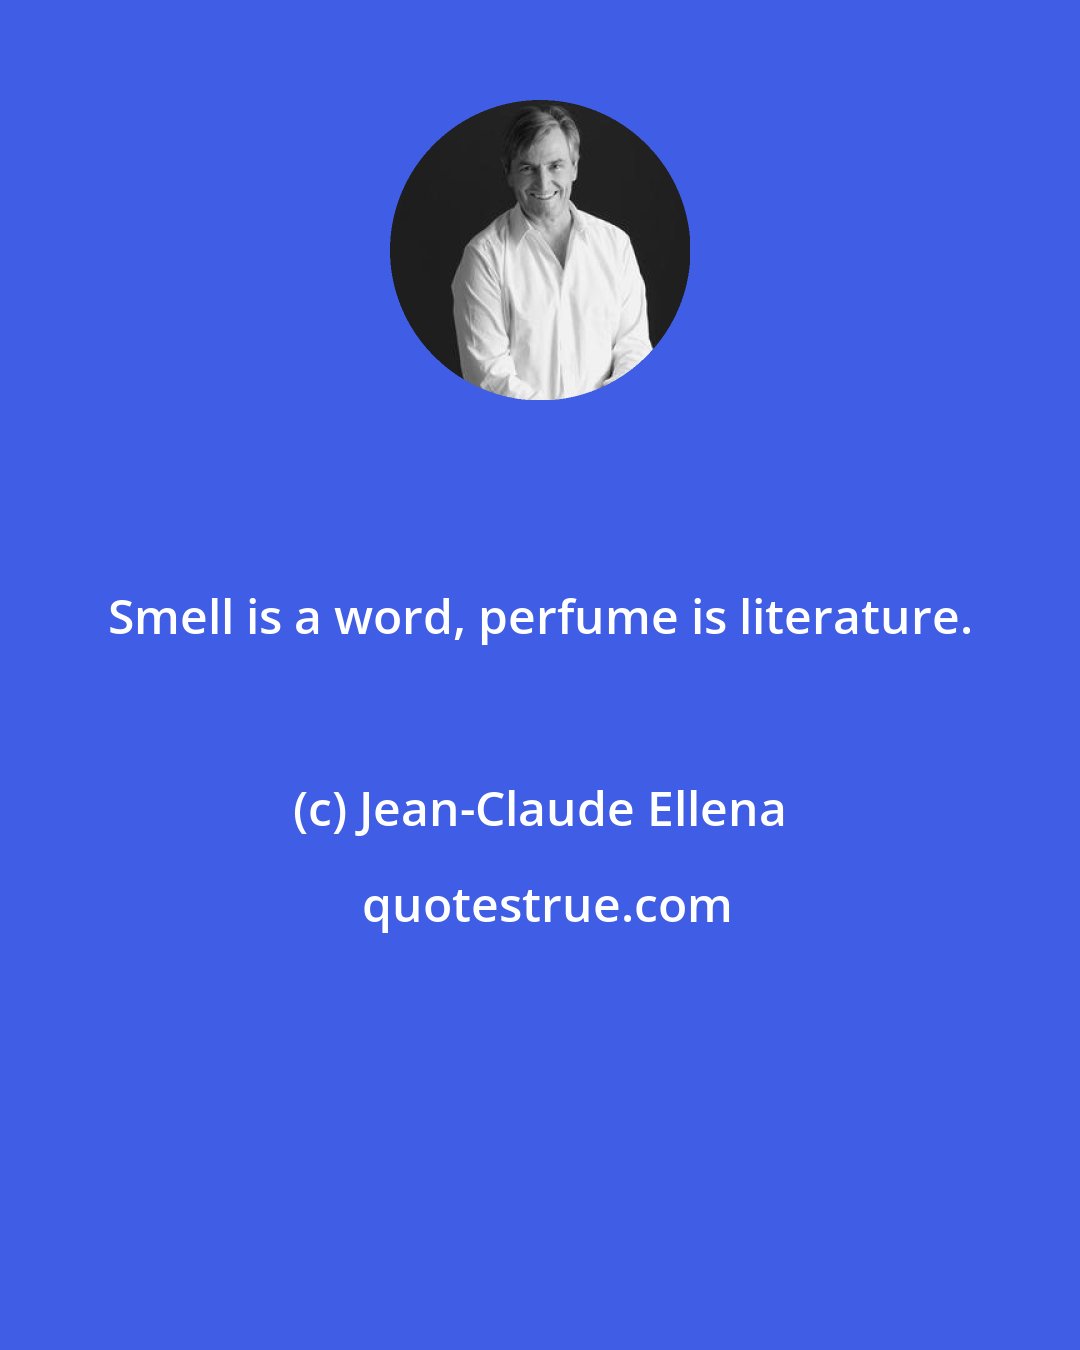 Jean-Claude Ellena: Smell is a word, perfume is literature.